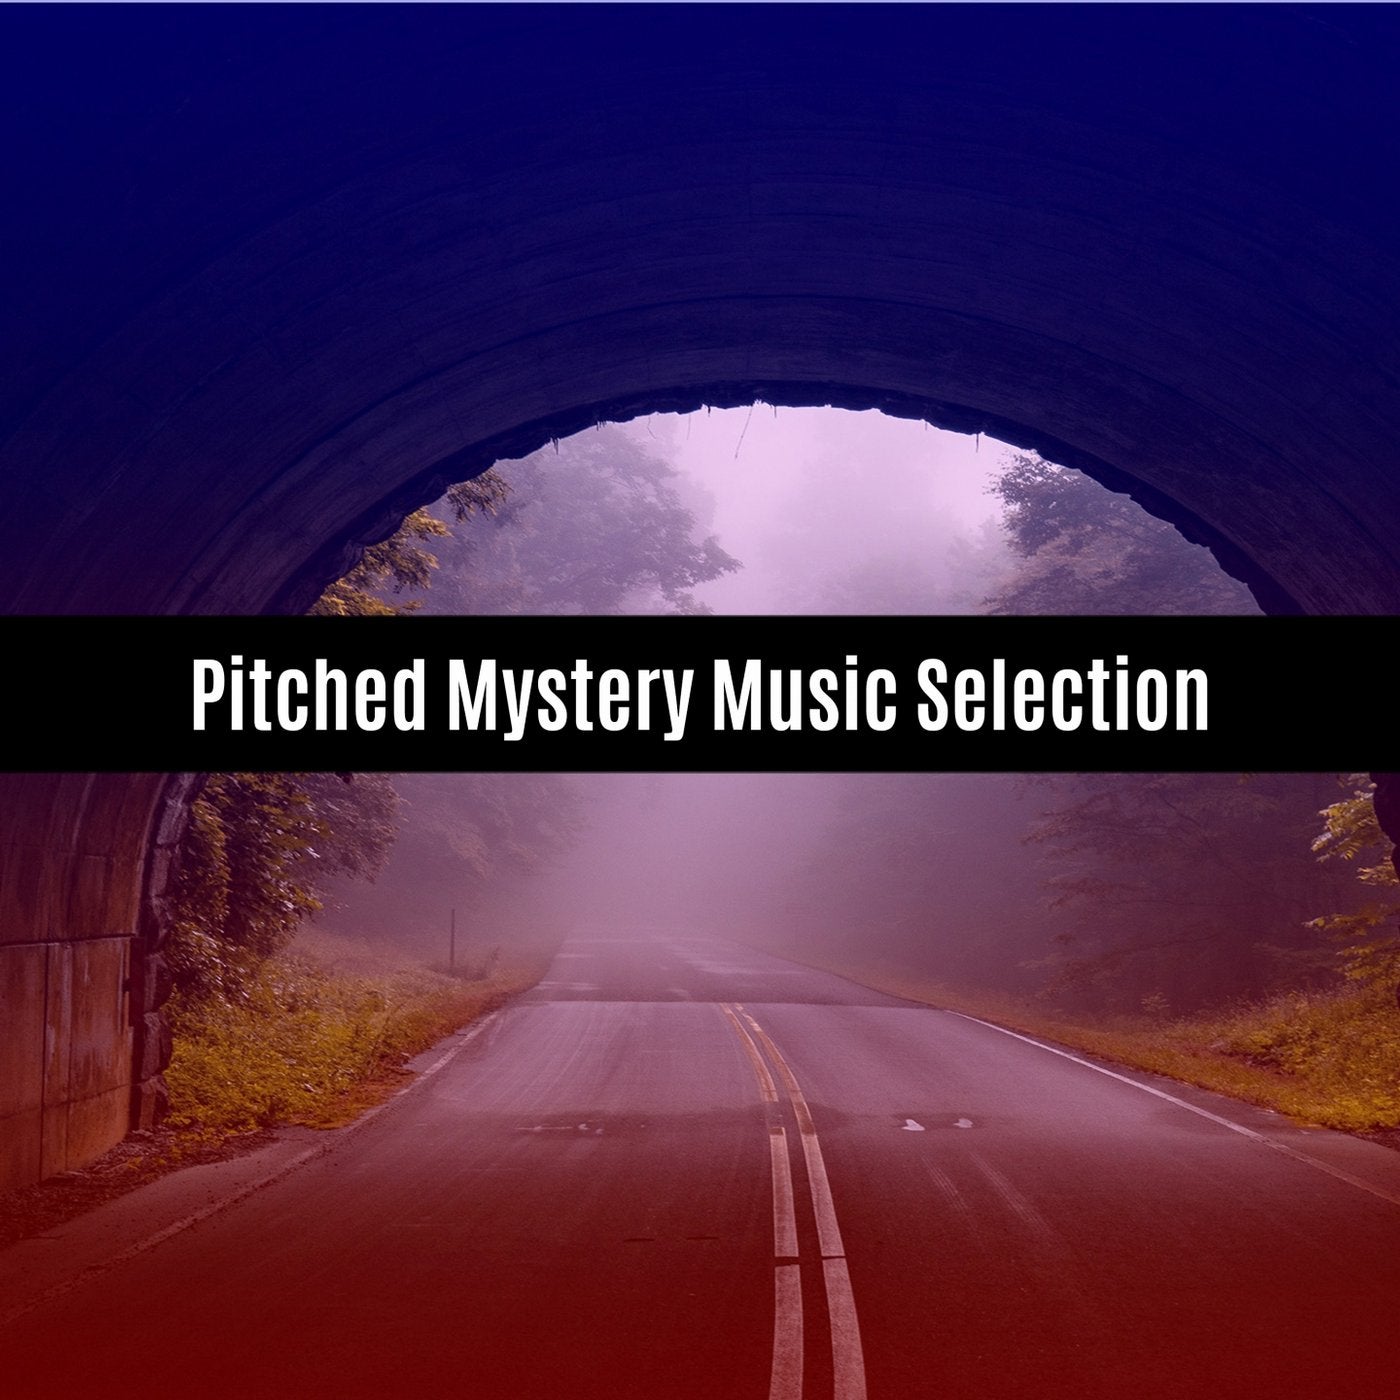 Pitched Mystery Music Selection